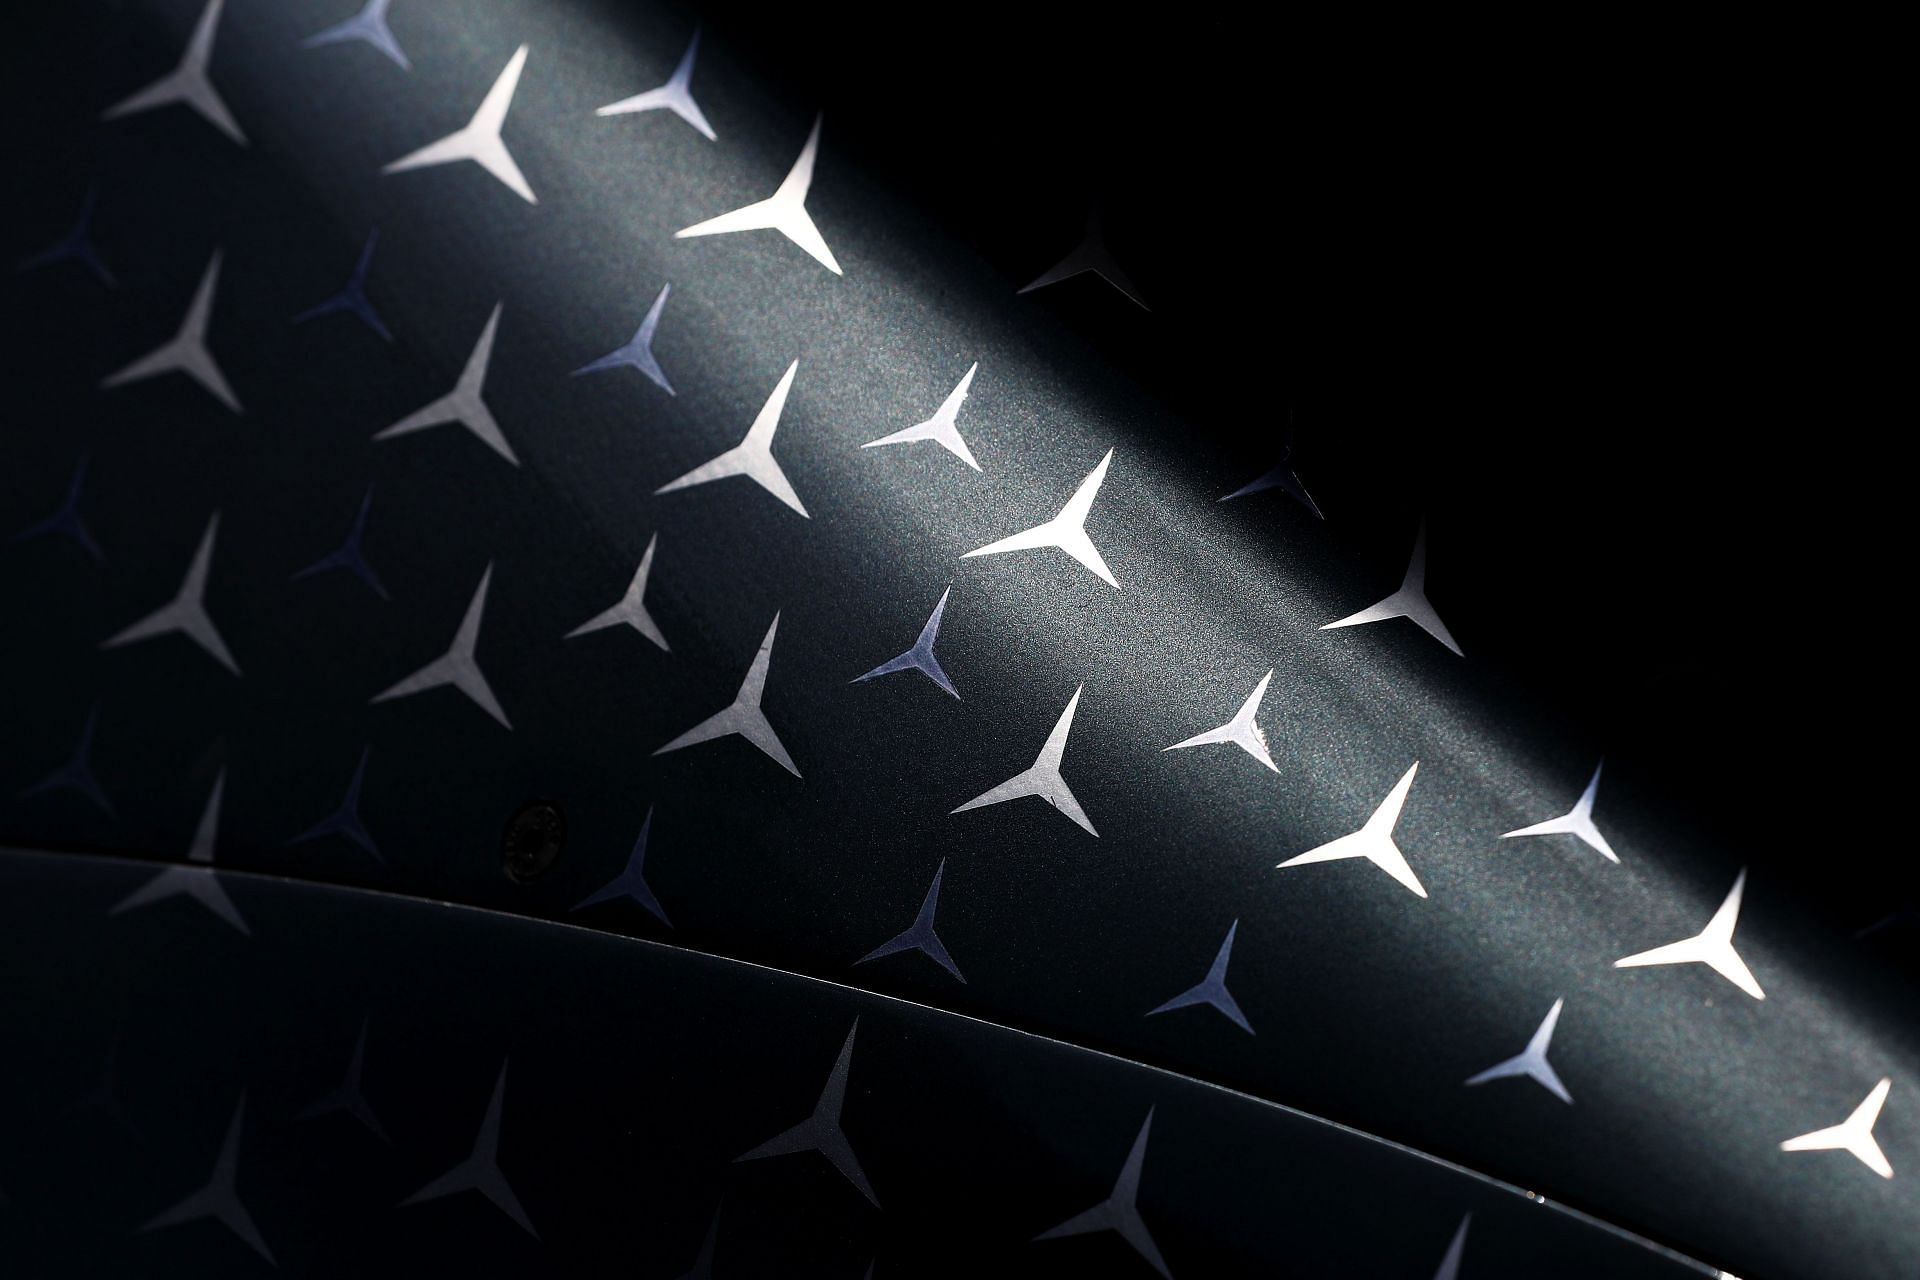 Mercedes stars are seen on the engine cover of their car in Monaco (Photo by Mark Thompson/Getty Images)